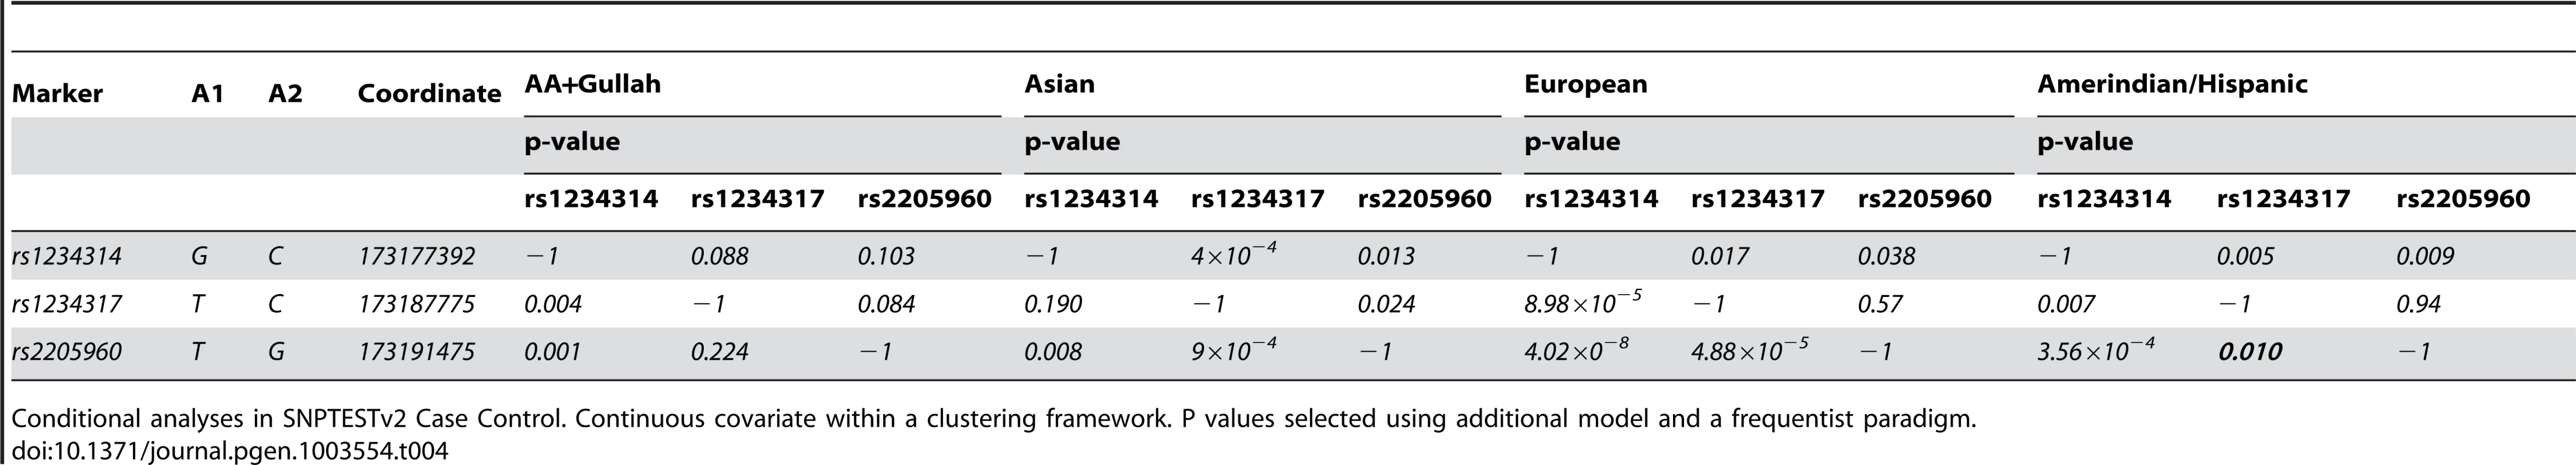 Conditional regression results for 5′TNFSF4 variants in four groups.